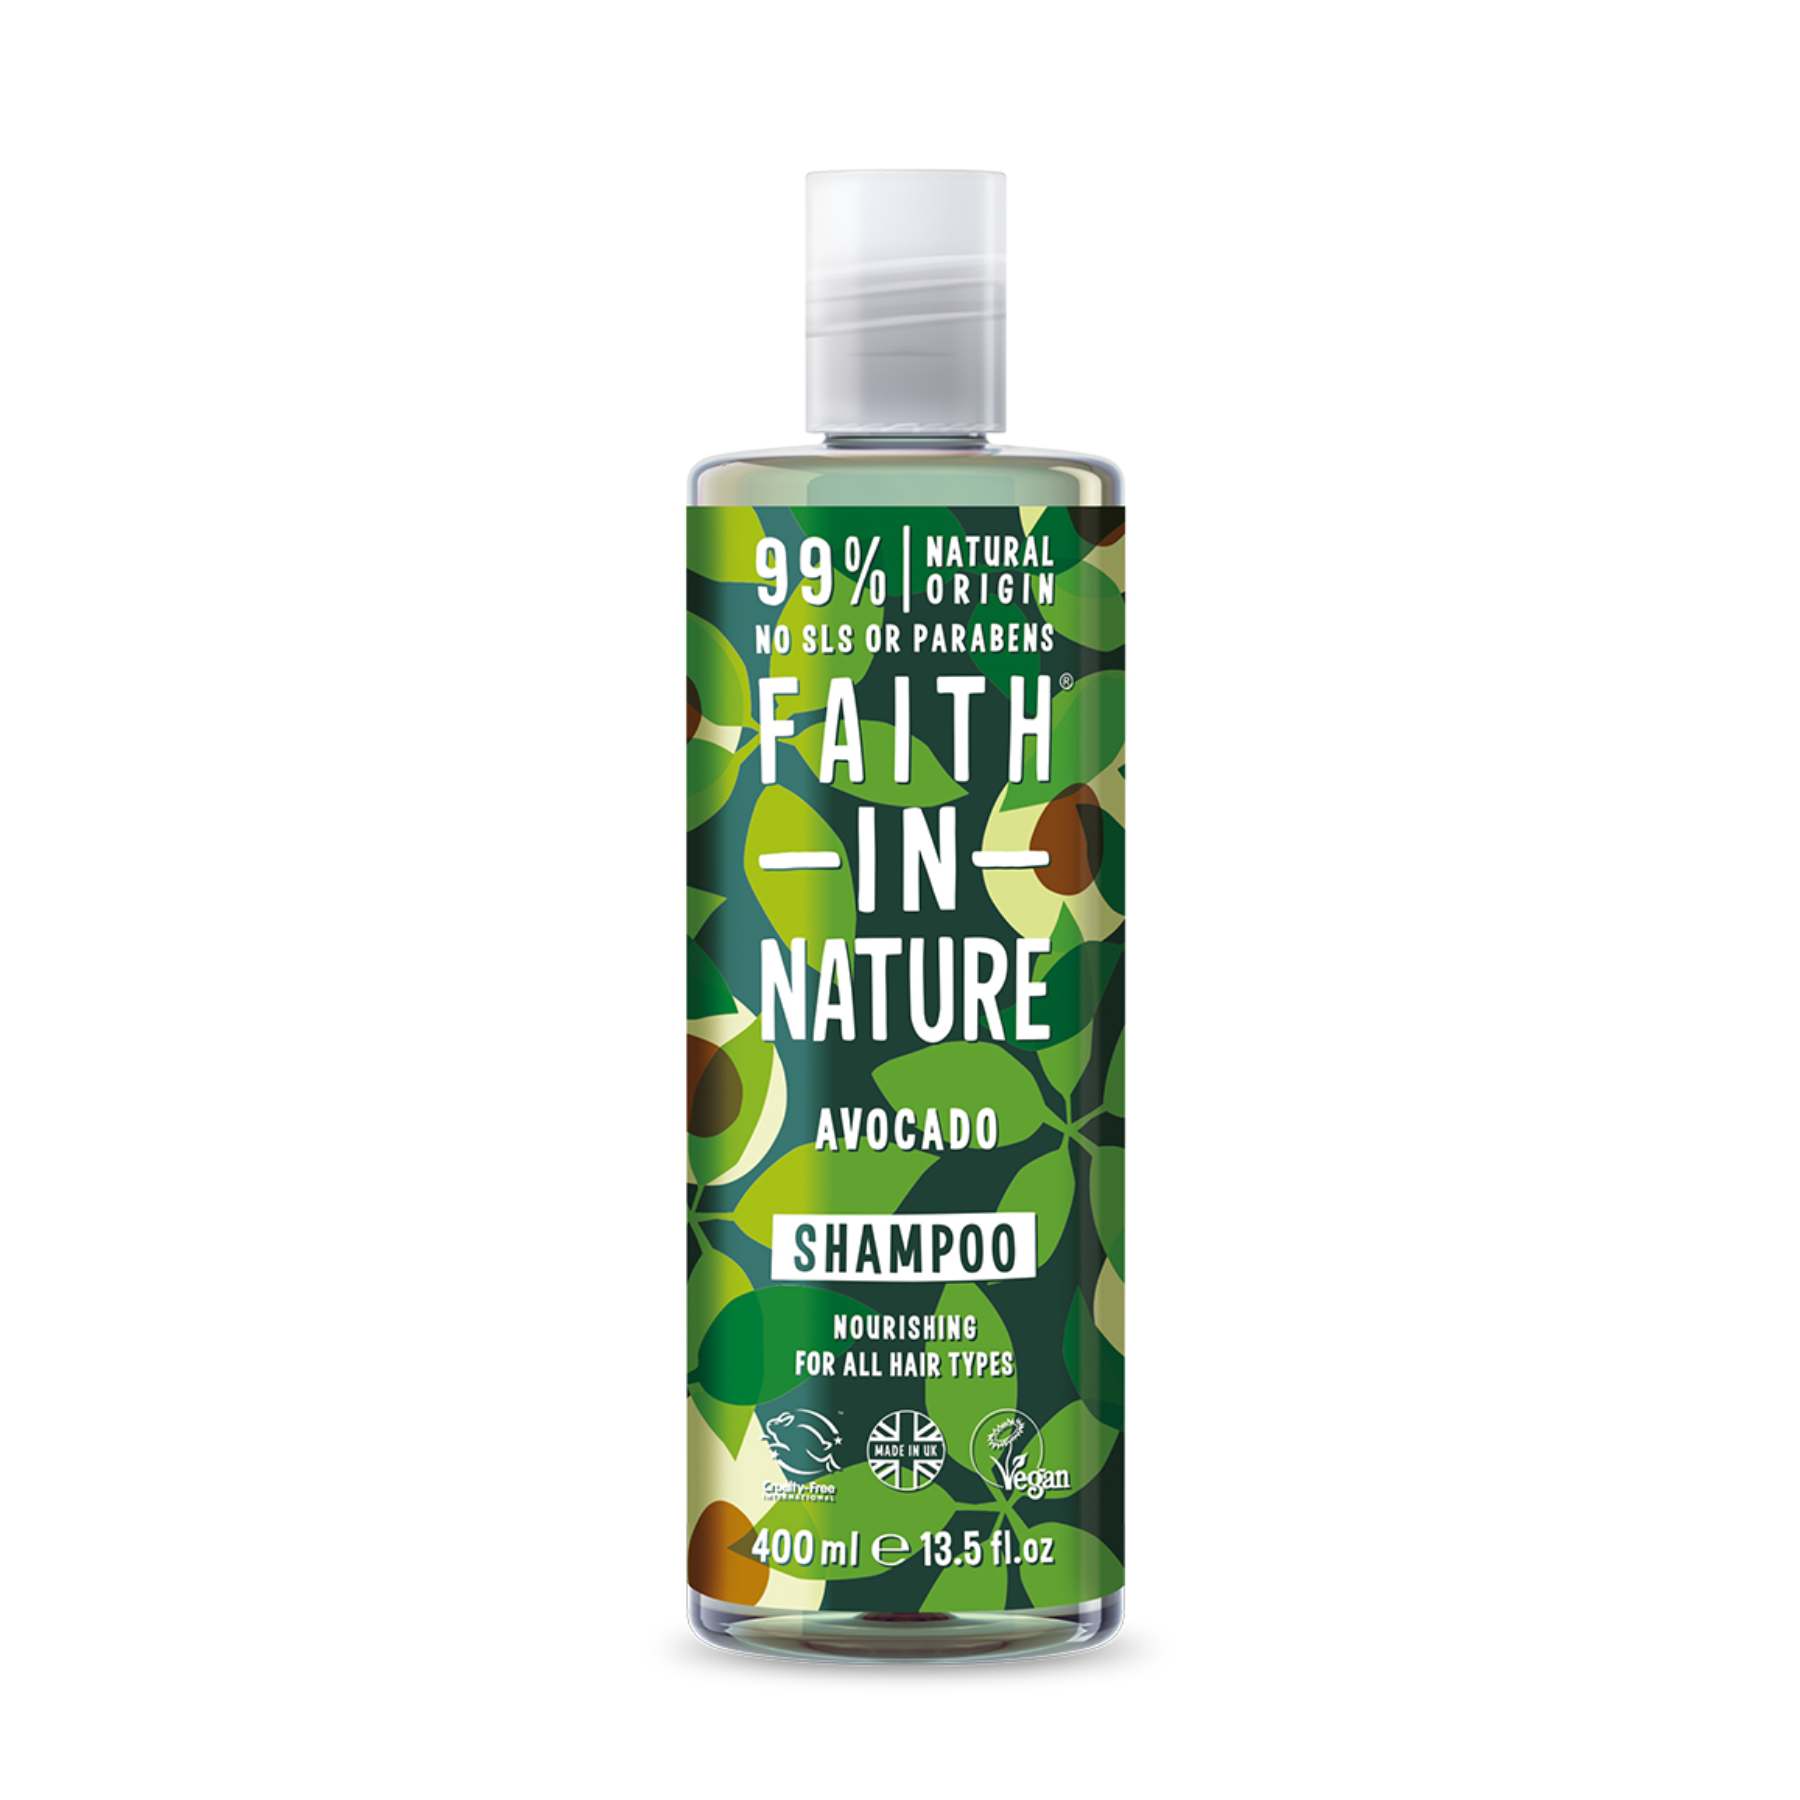 Shop Avocado Shampoo from Faith in Nature on SublimeLife.in. Best for nourishing and revitalising your hair.